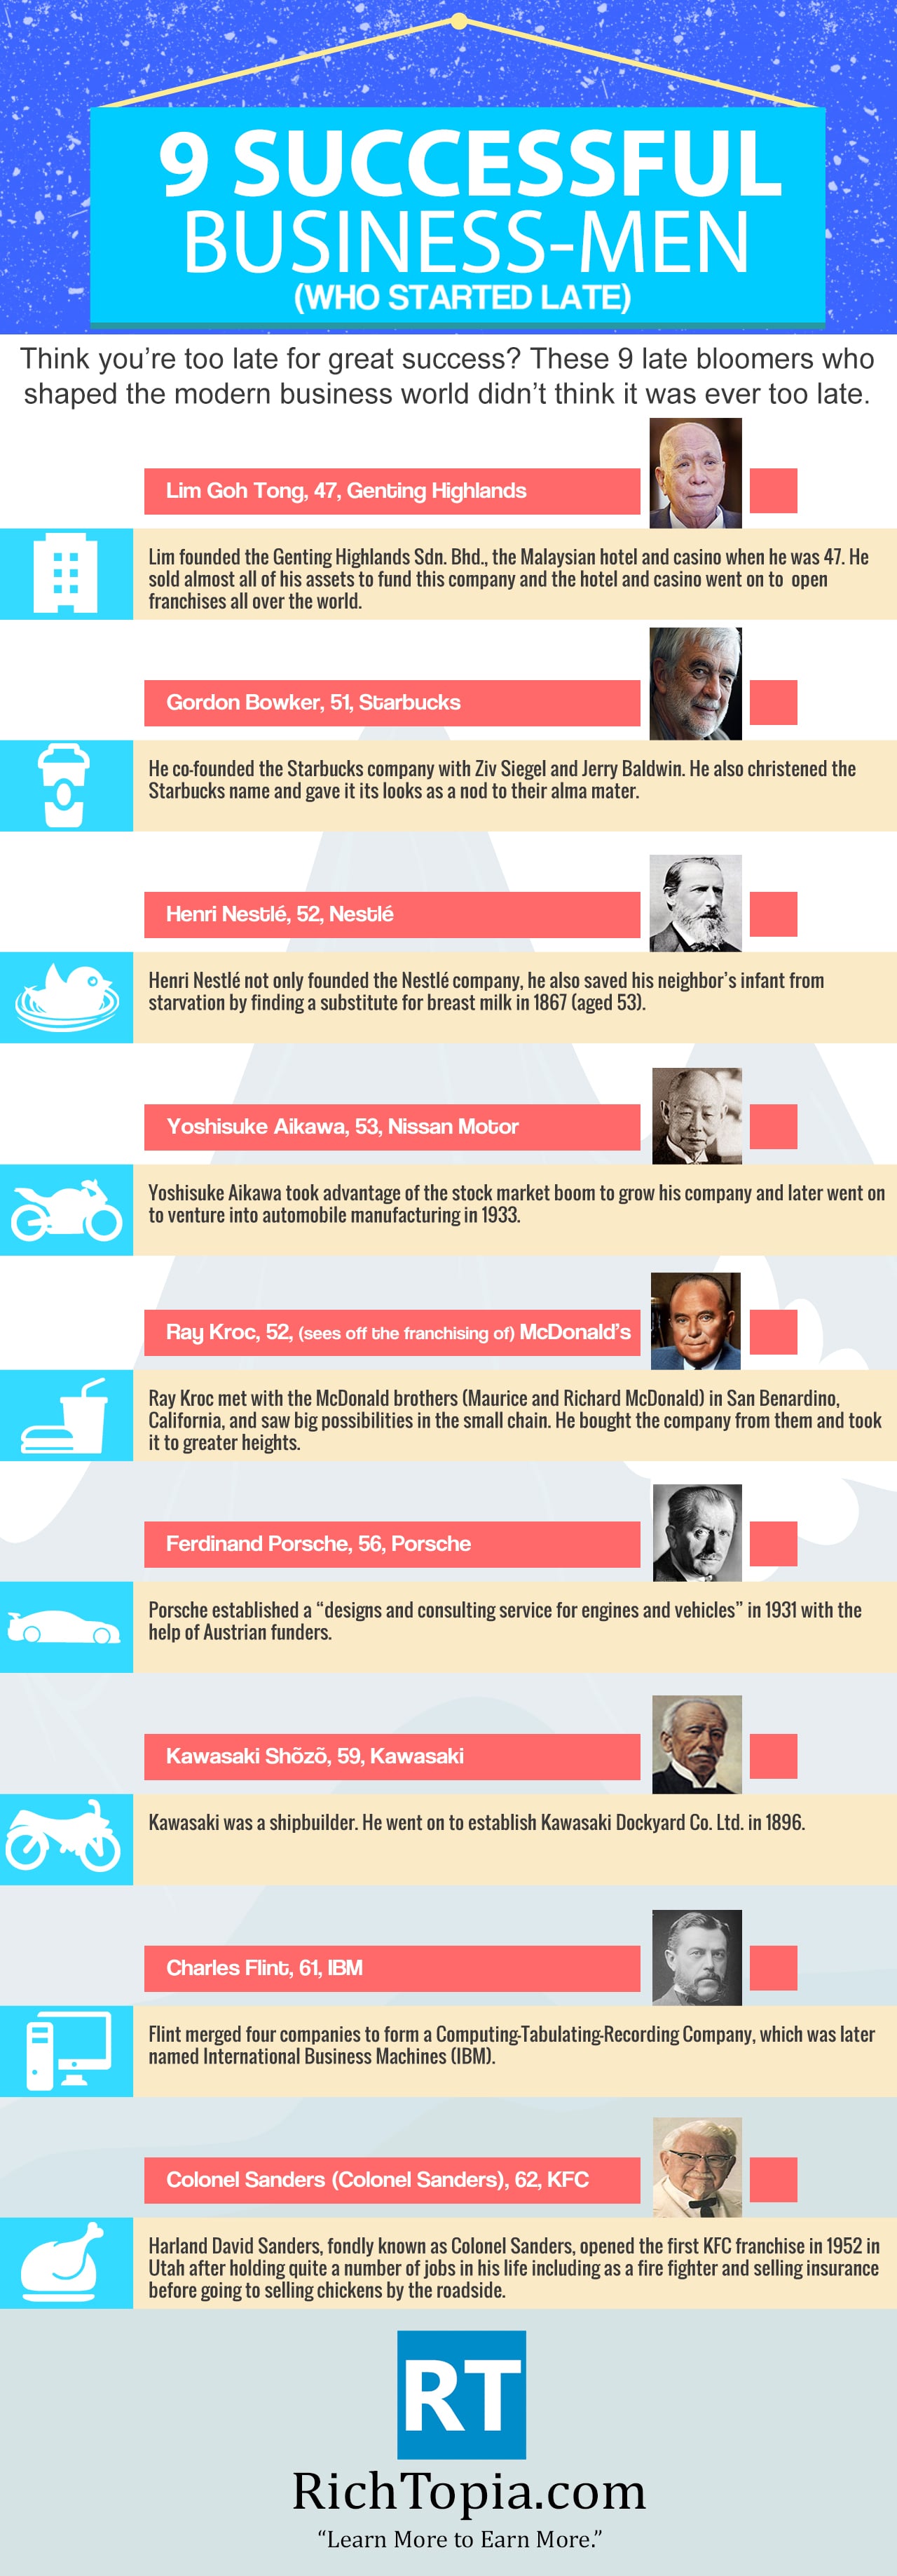 9 successful businessmen who started late